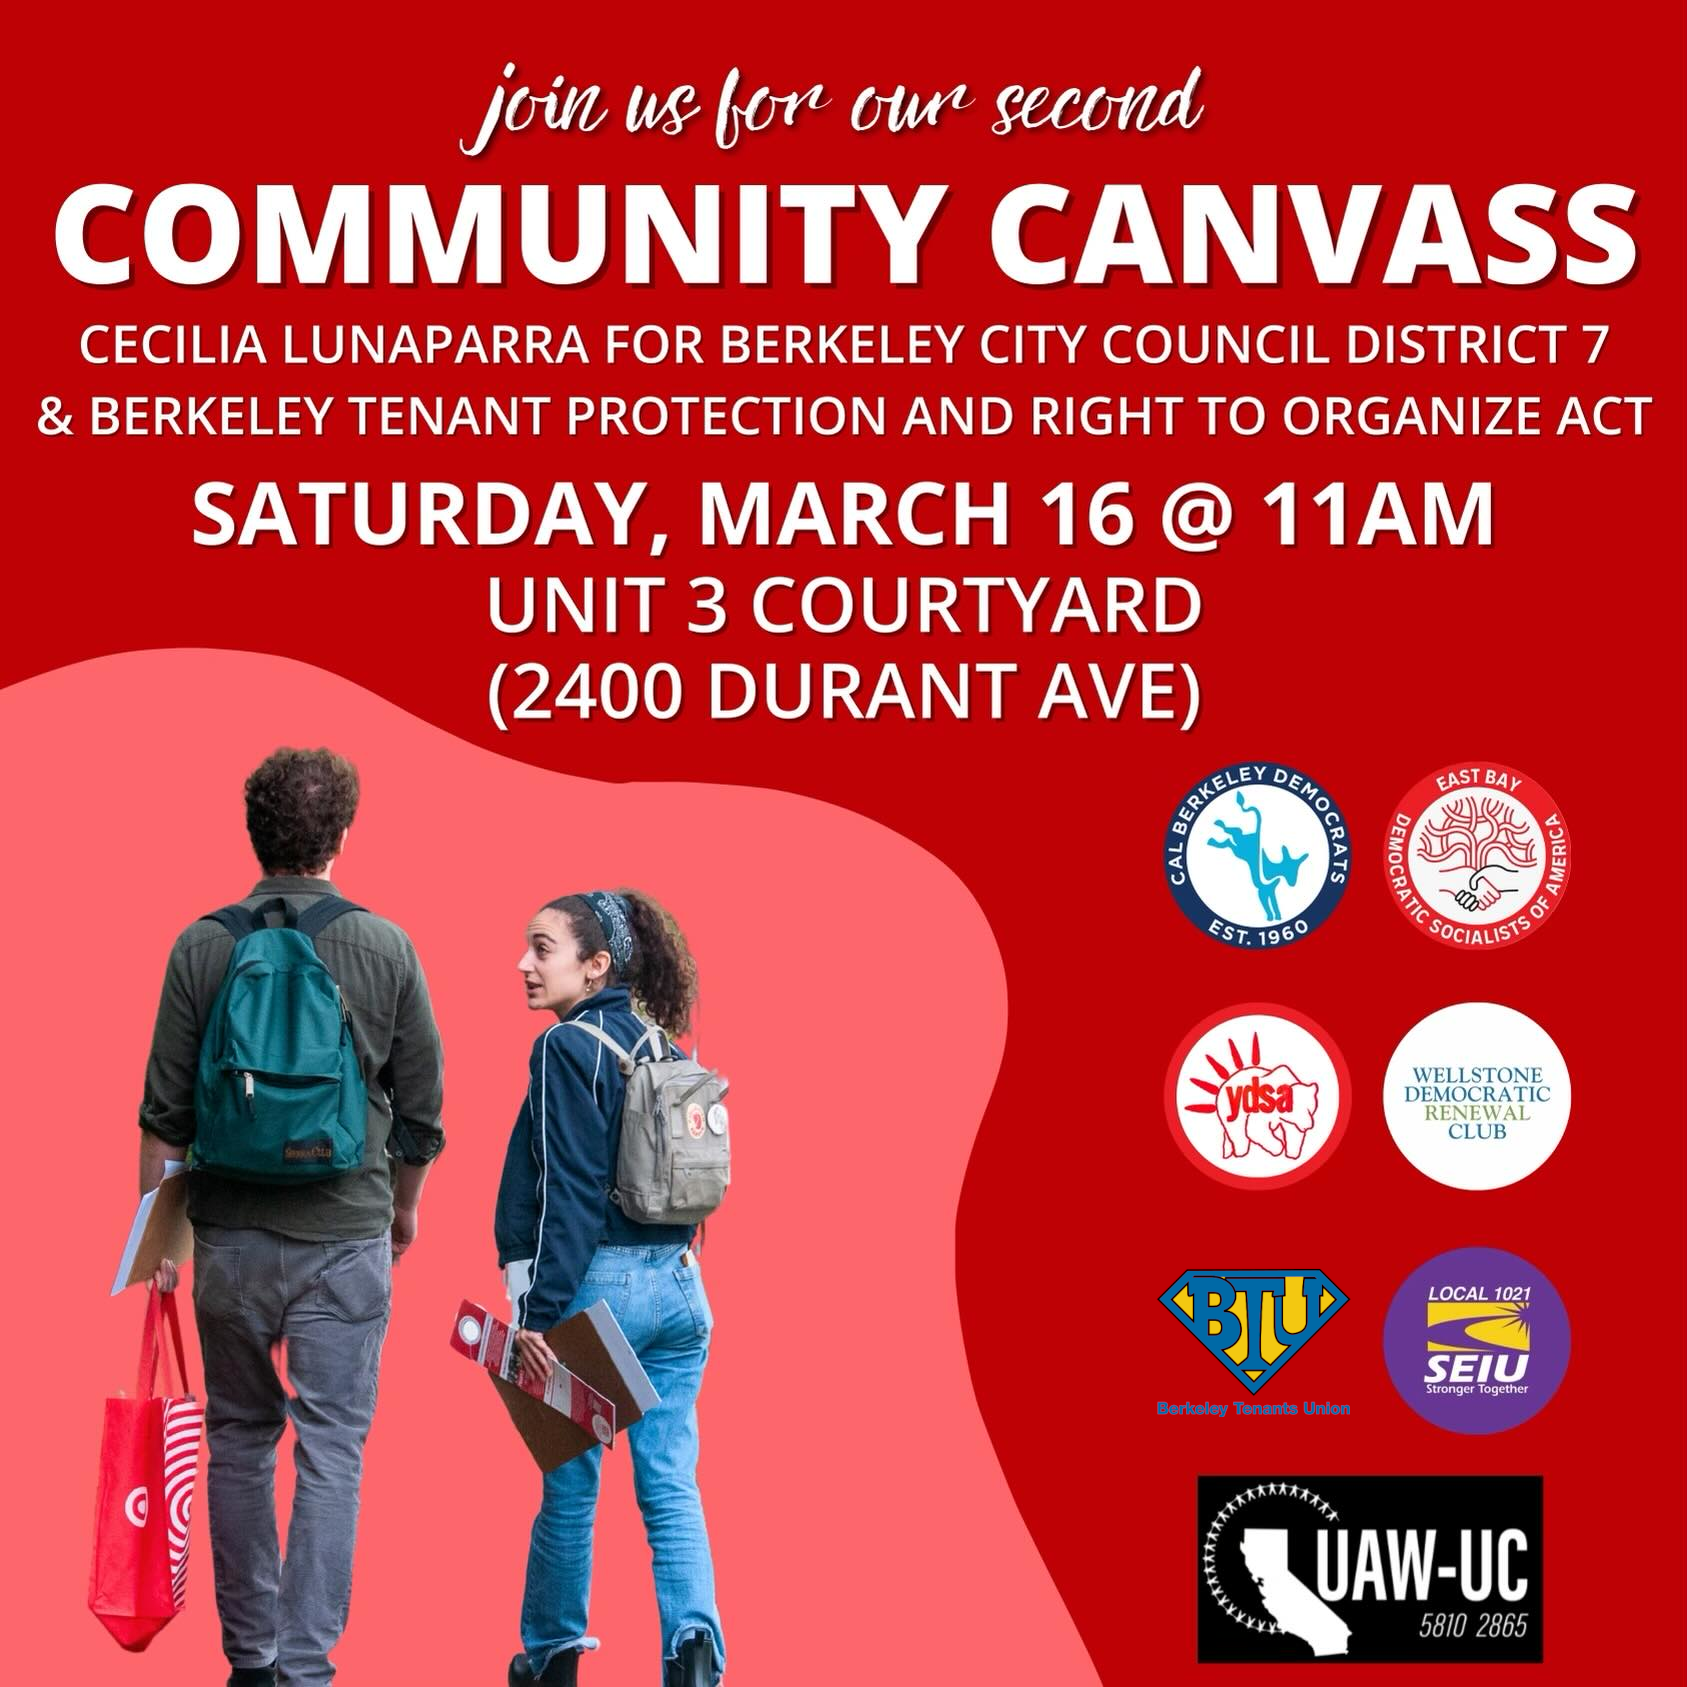 Second Canvass for Cecilia Lunaparra and the Berkeley Tenant Protection and Right to Organize Act